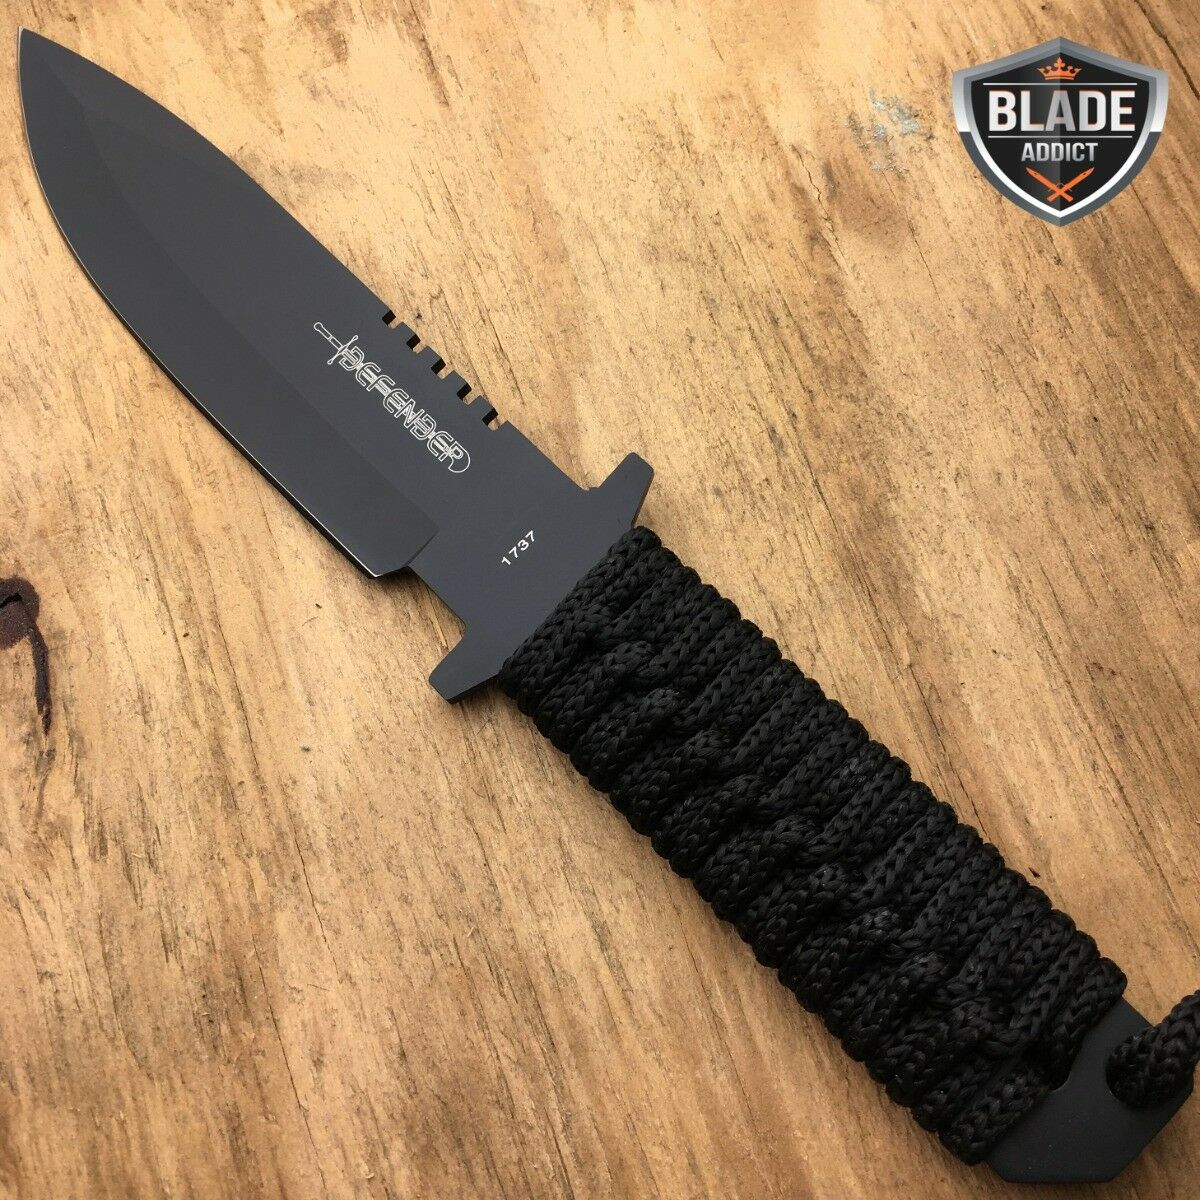 11" FULL TANG TACTICAL COMBAT FIXED BLADE HUNTING KNIFE SURVIVAL CAMPING BOWIE